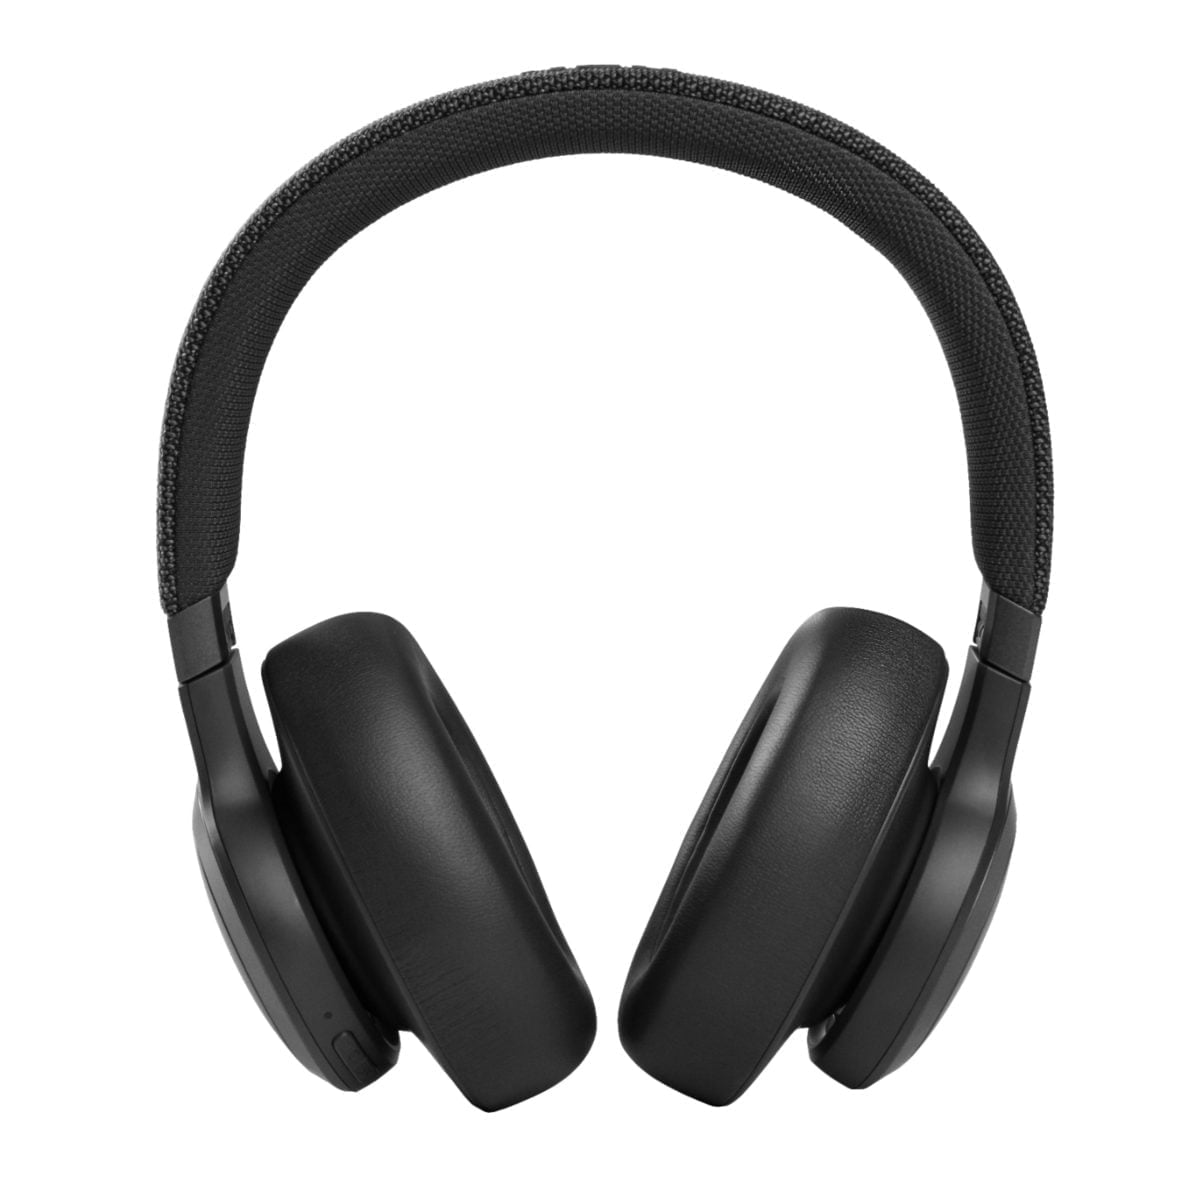 6463749 Sd Scaled Jbl &Lt;H1&Gt;Jbl Live 660Nc Wireless Noise Cancelling Headphones - Black&Lt;/H1&Gt; Https://Www.youtube.com/Watch?V=Lr2Xbmbdmey In Your World, Music Is Essential, So Slip On A Pair Of Jbl Live 660Nc And Elevate Your Day. Feel The Power Of Jbl Signature Sound Delivered By 40Mm Drivers, Enjoy The Convenience Of Adaptive Noise Cancelling And Smart Ambient Technologies That Allow You To Focus On What Matters For You, And Talk To Your Favorite Voice Assistant With A Tap On The Ear Cup. Rock Out Uninterruptedly For 50 Hours! Jbl Jbl Live 660Nc Wireless Noise Cancelling Headphones - Black